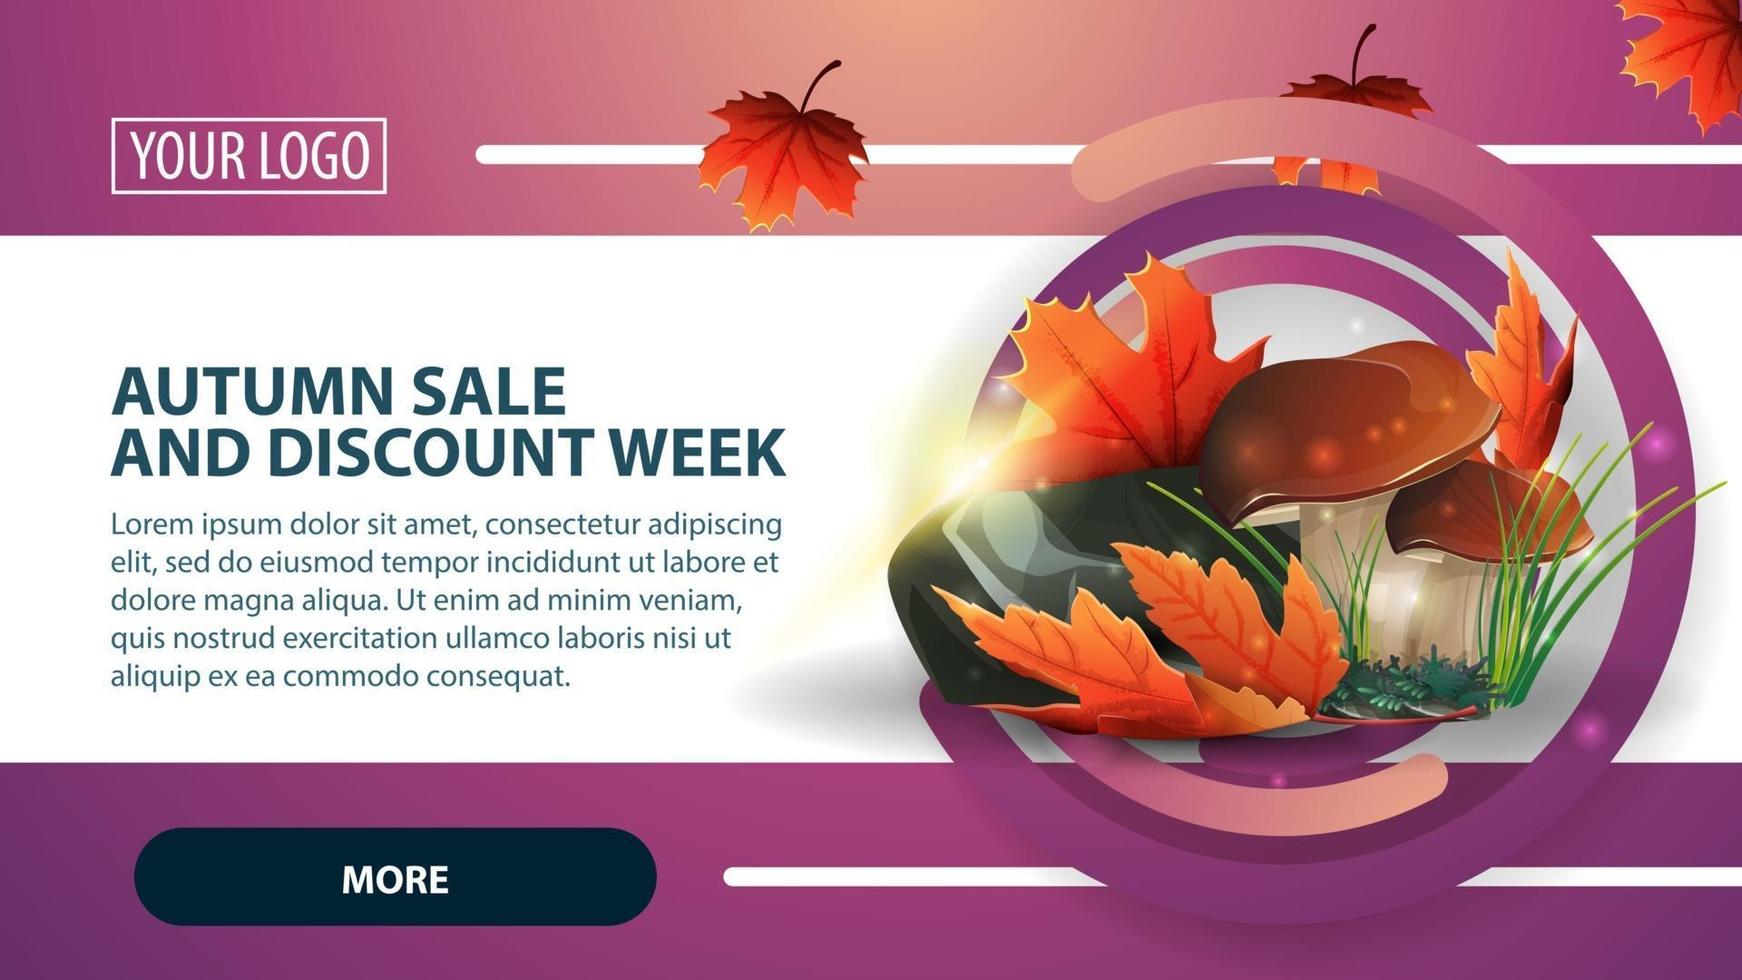 Autumn sale and discount week, banner with mushrooms and autumn leaves vector